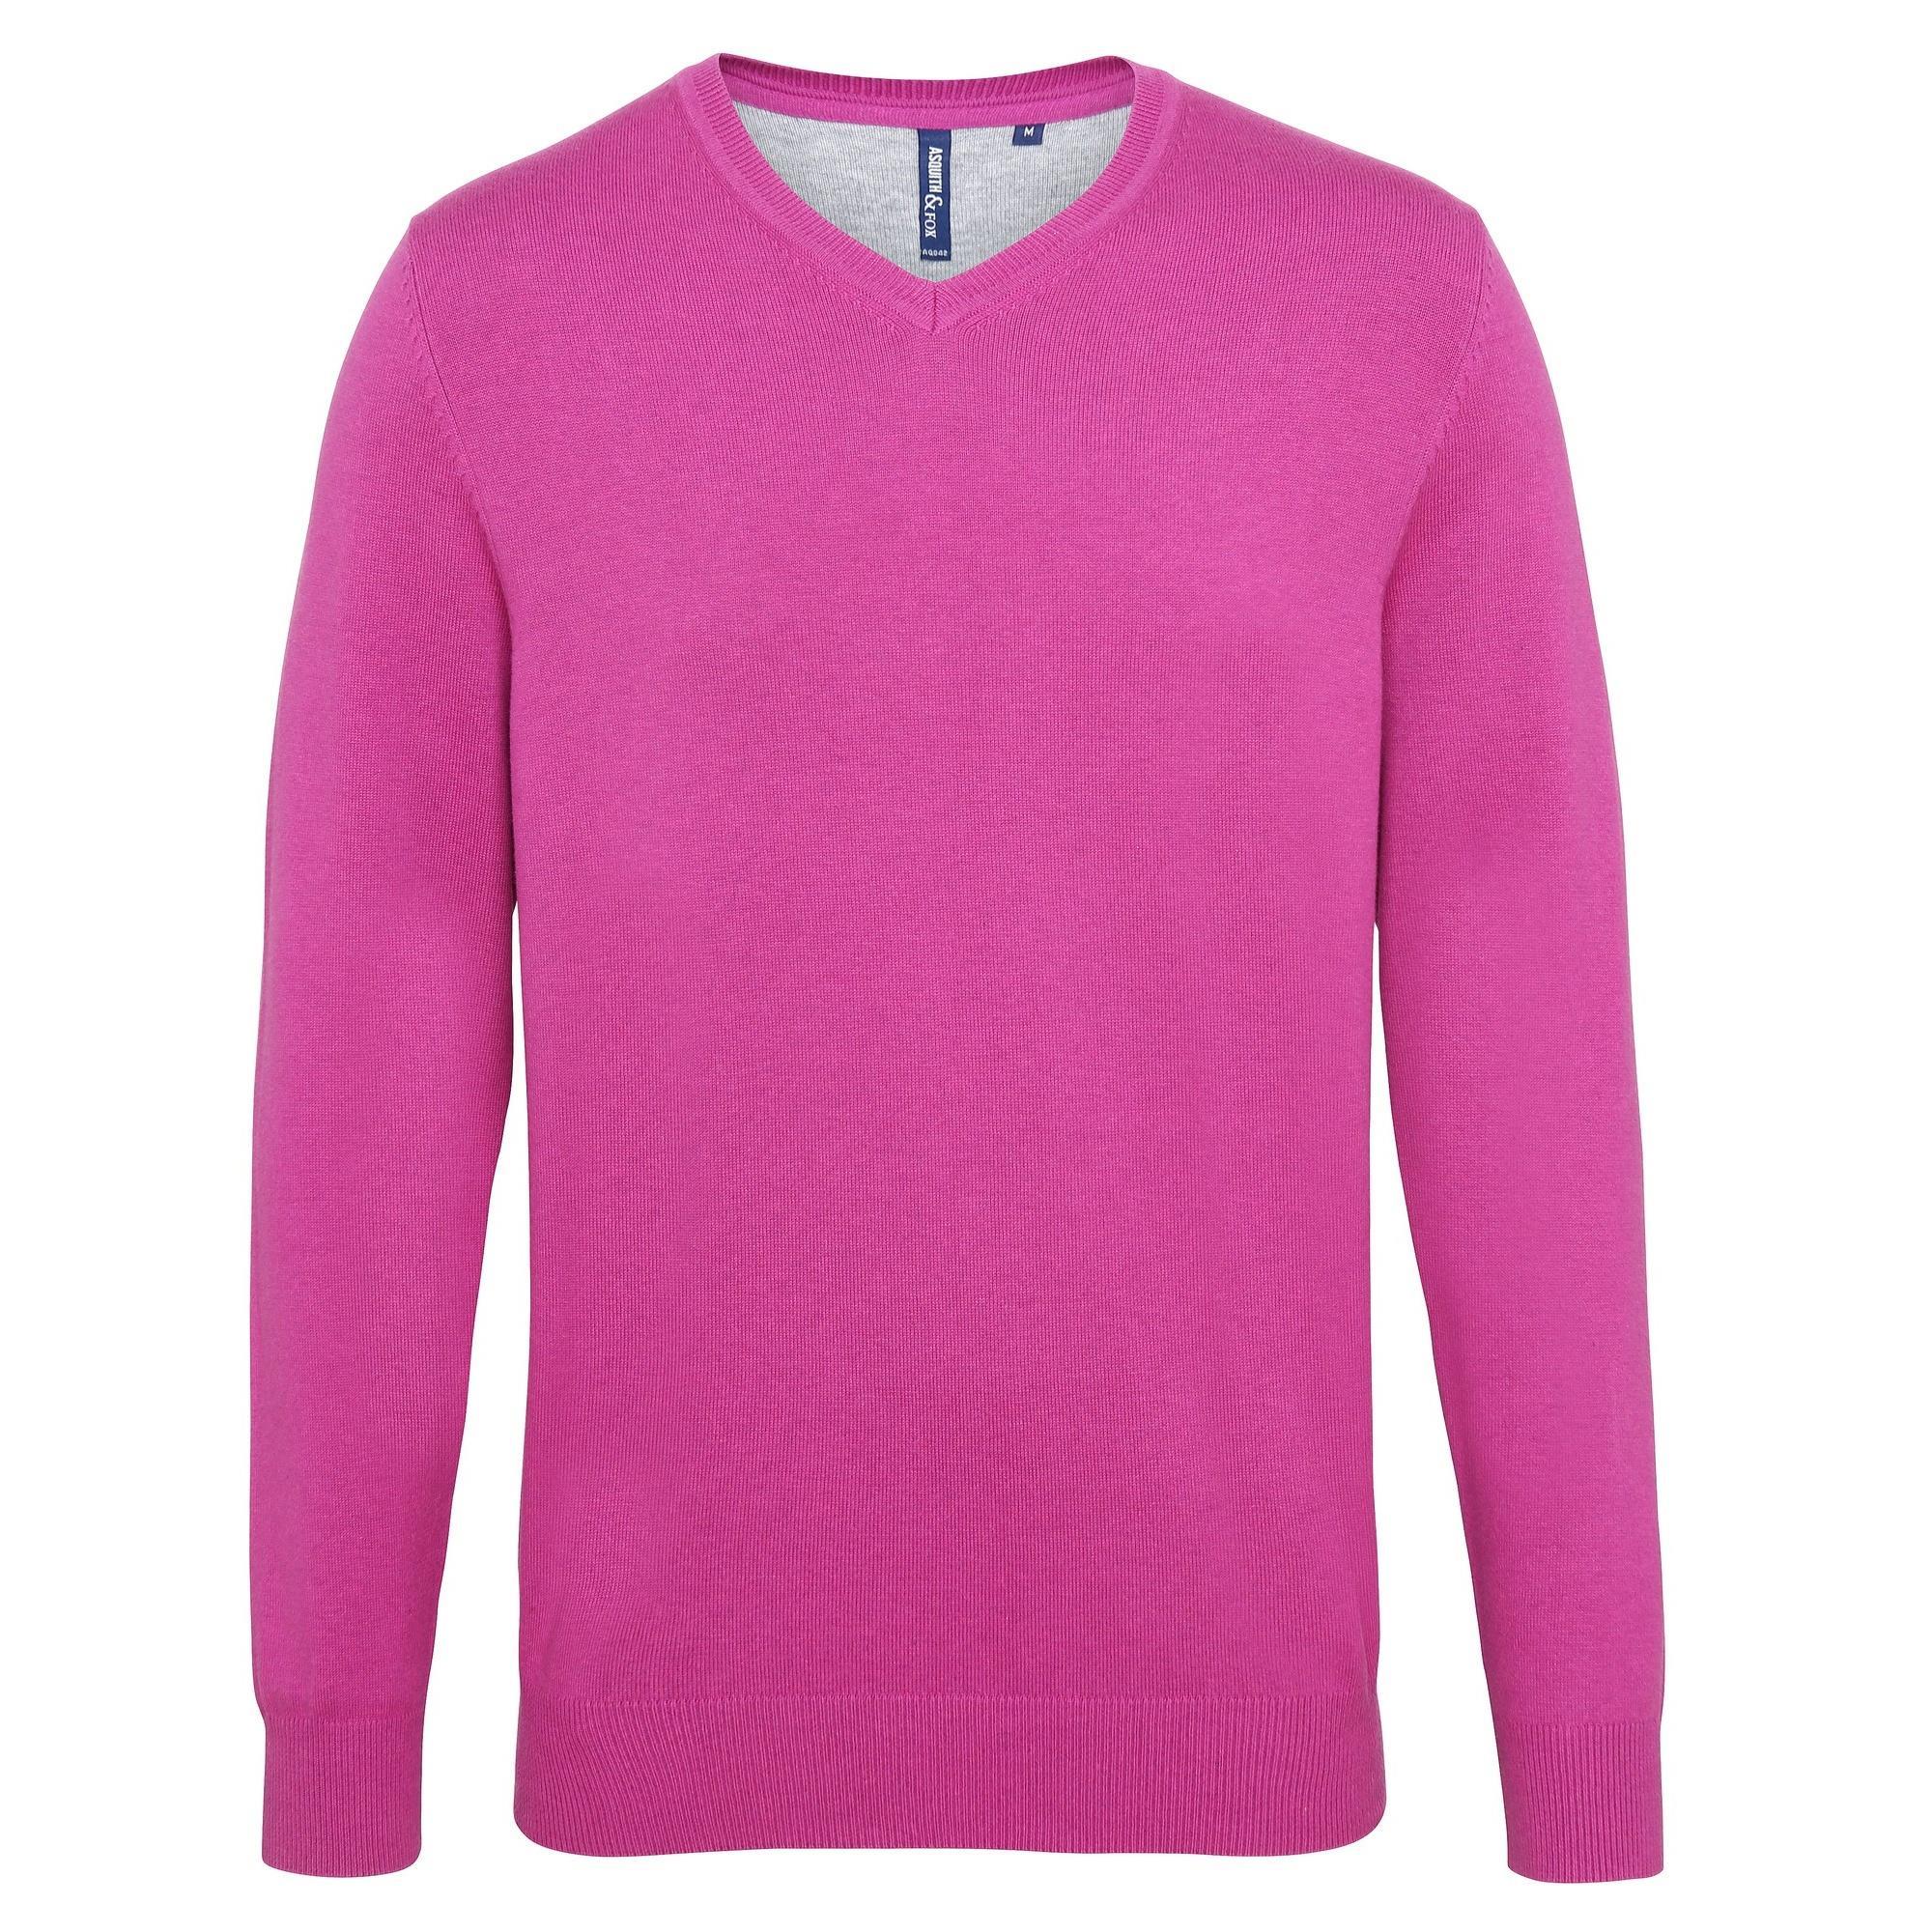 Asquith & Fox Mens Cotton Rich V-Neck Sweater (Orchid Heather) (L)